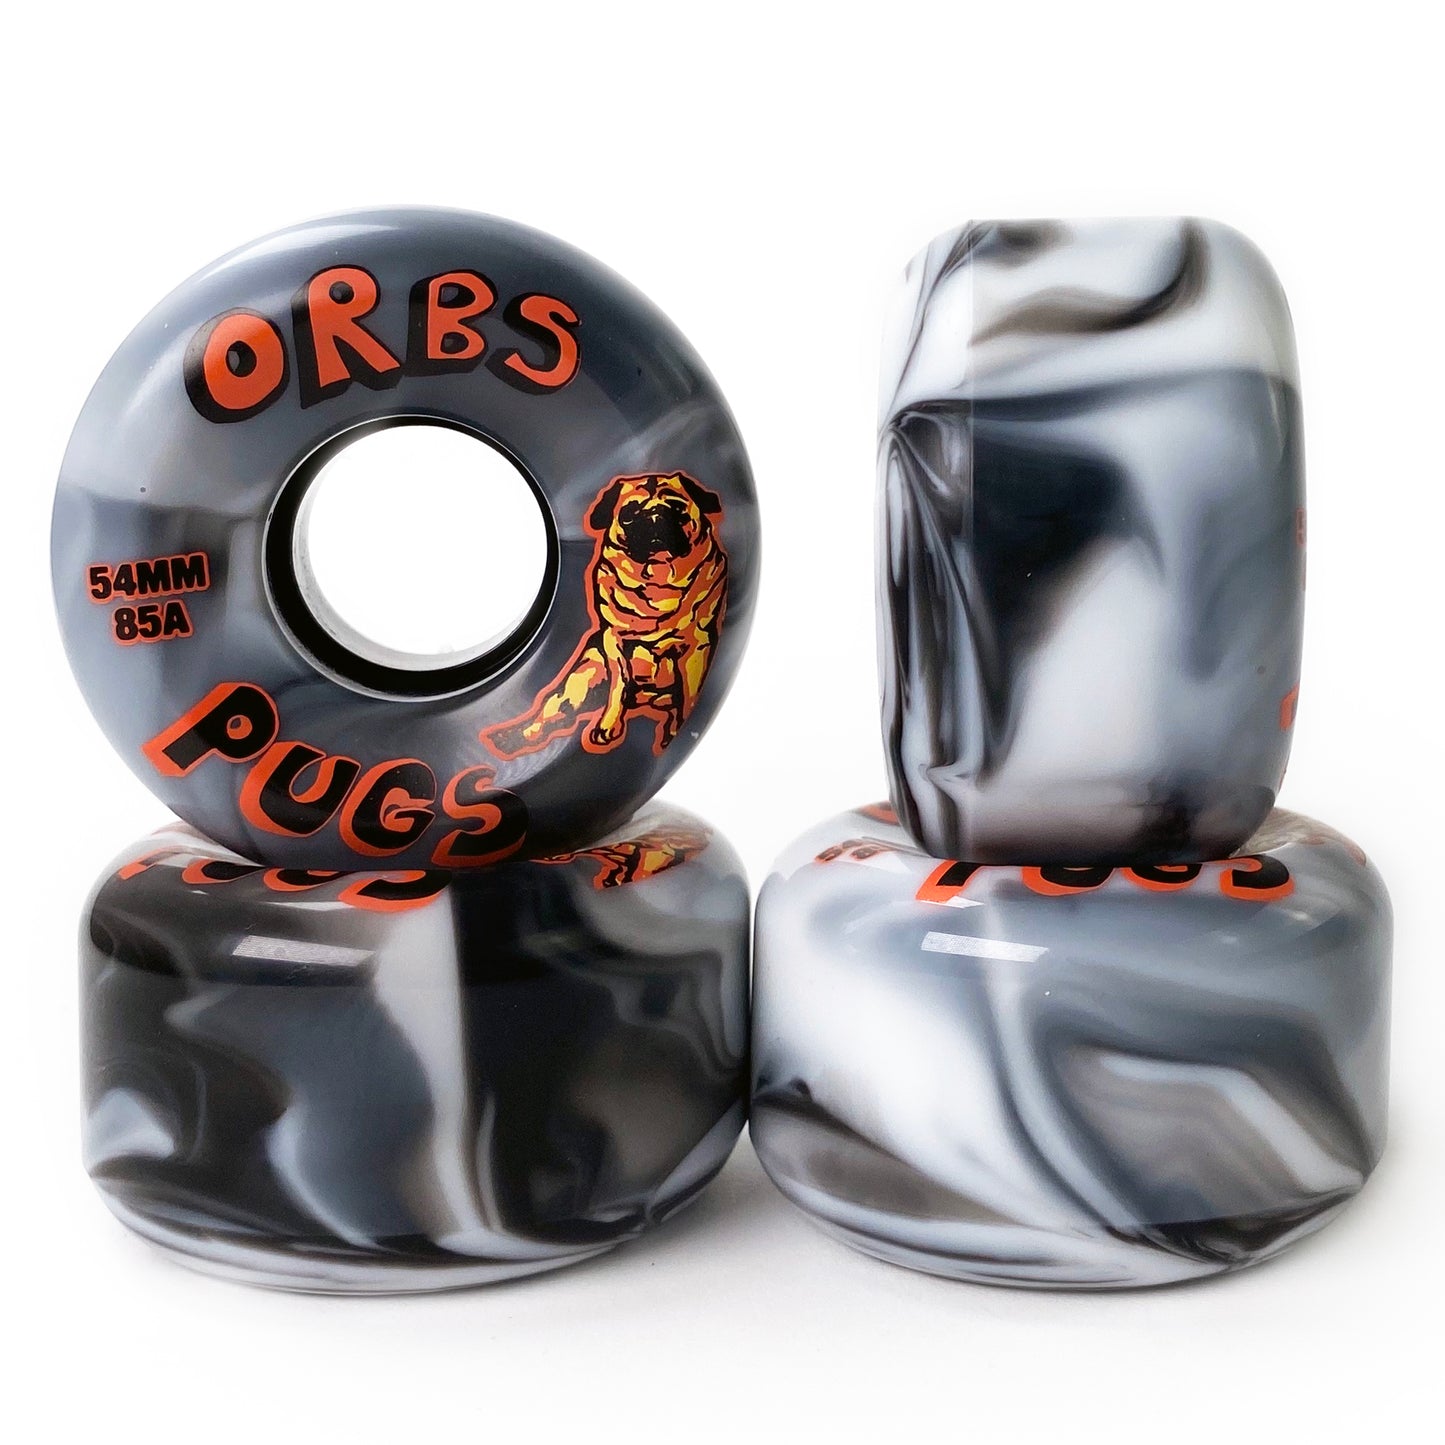 Orbs - 54mm - Pugs 85A Soft Wheels - Black / White - Prime Delux Store